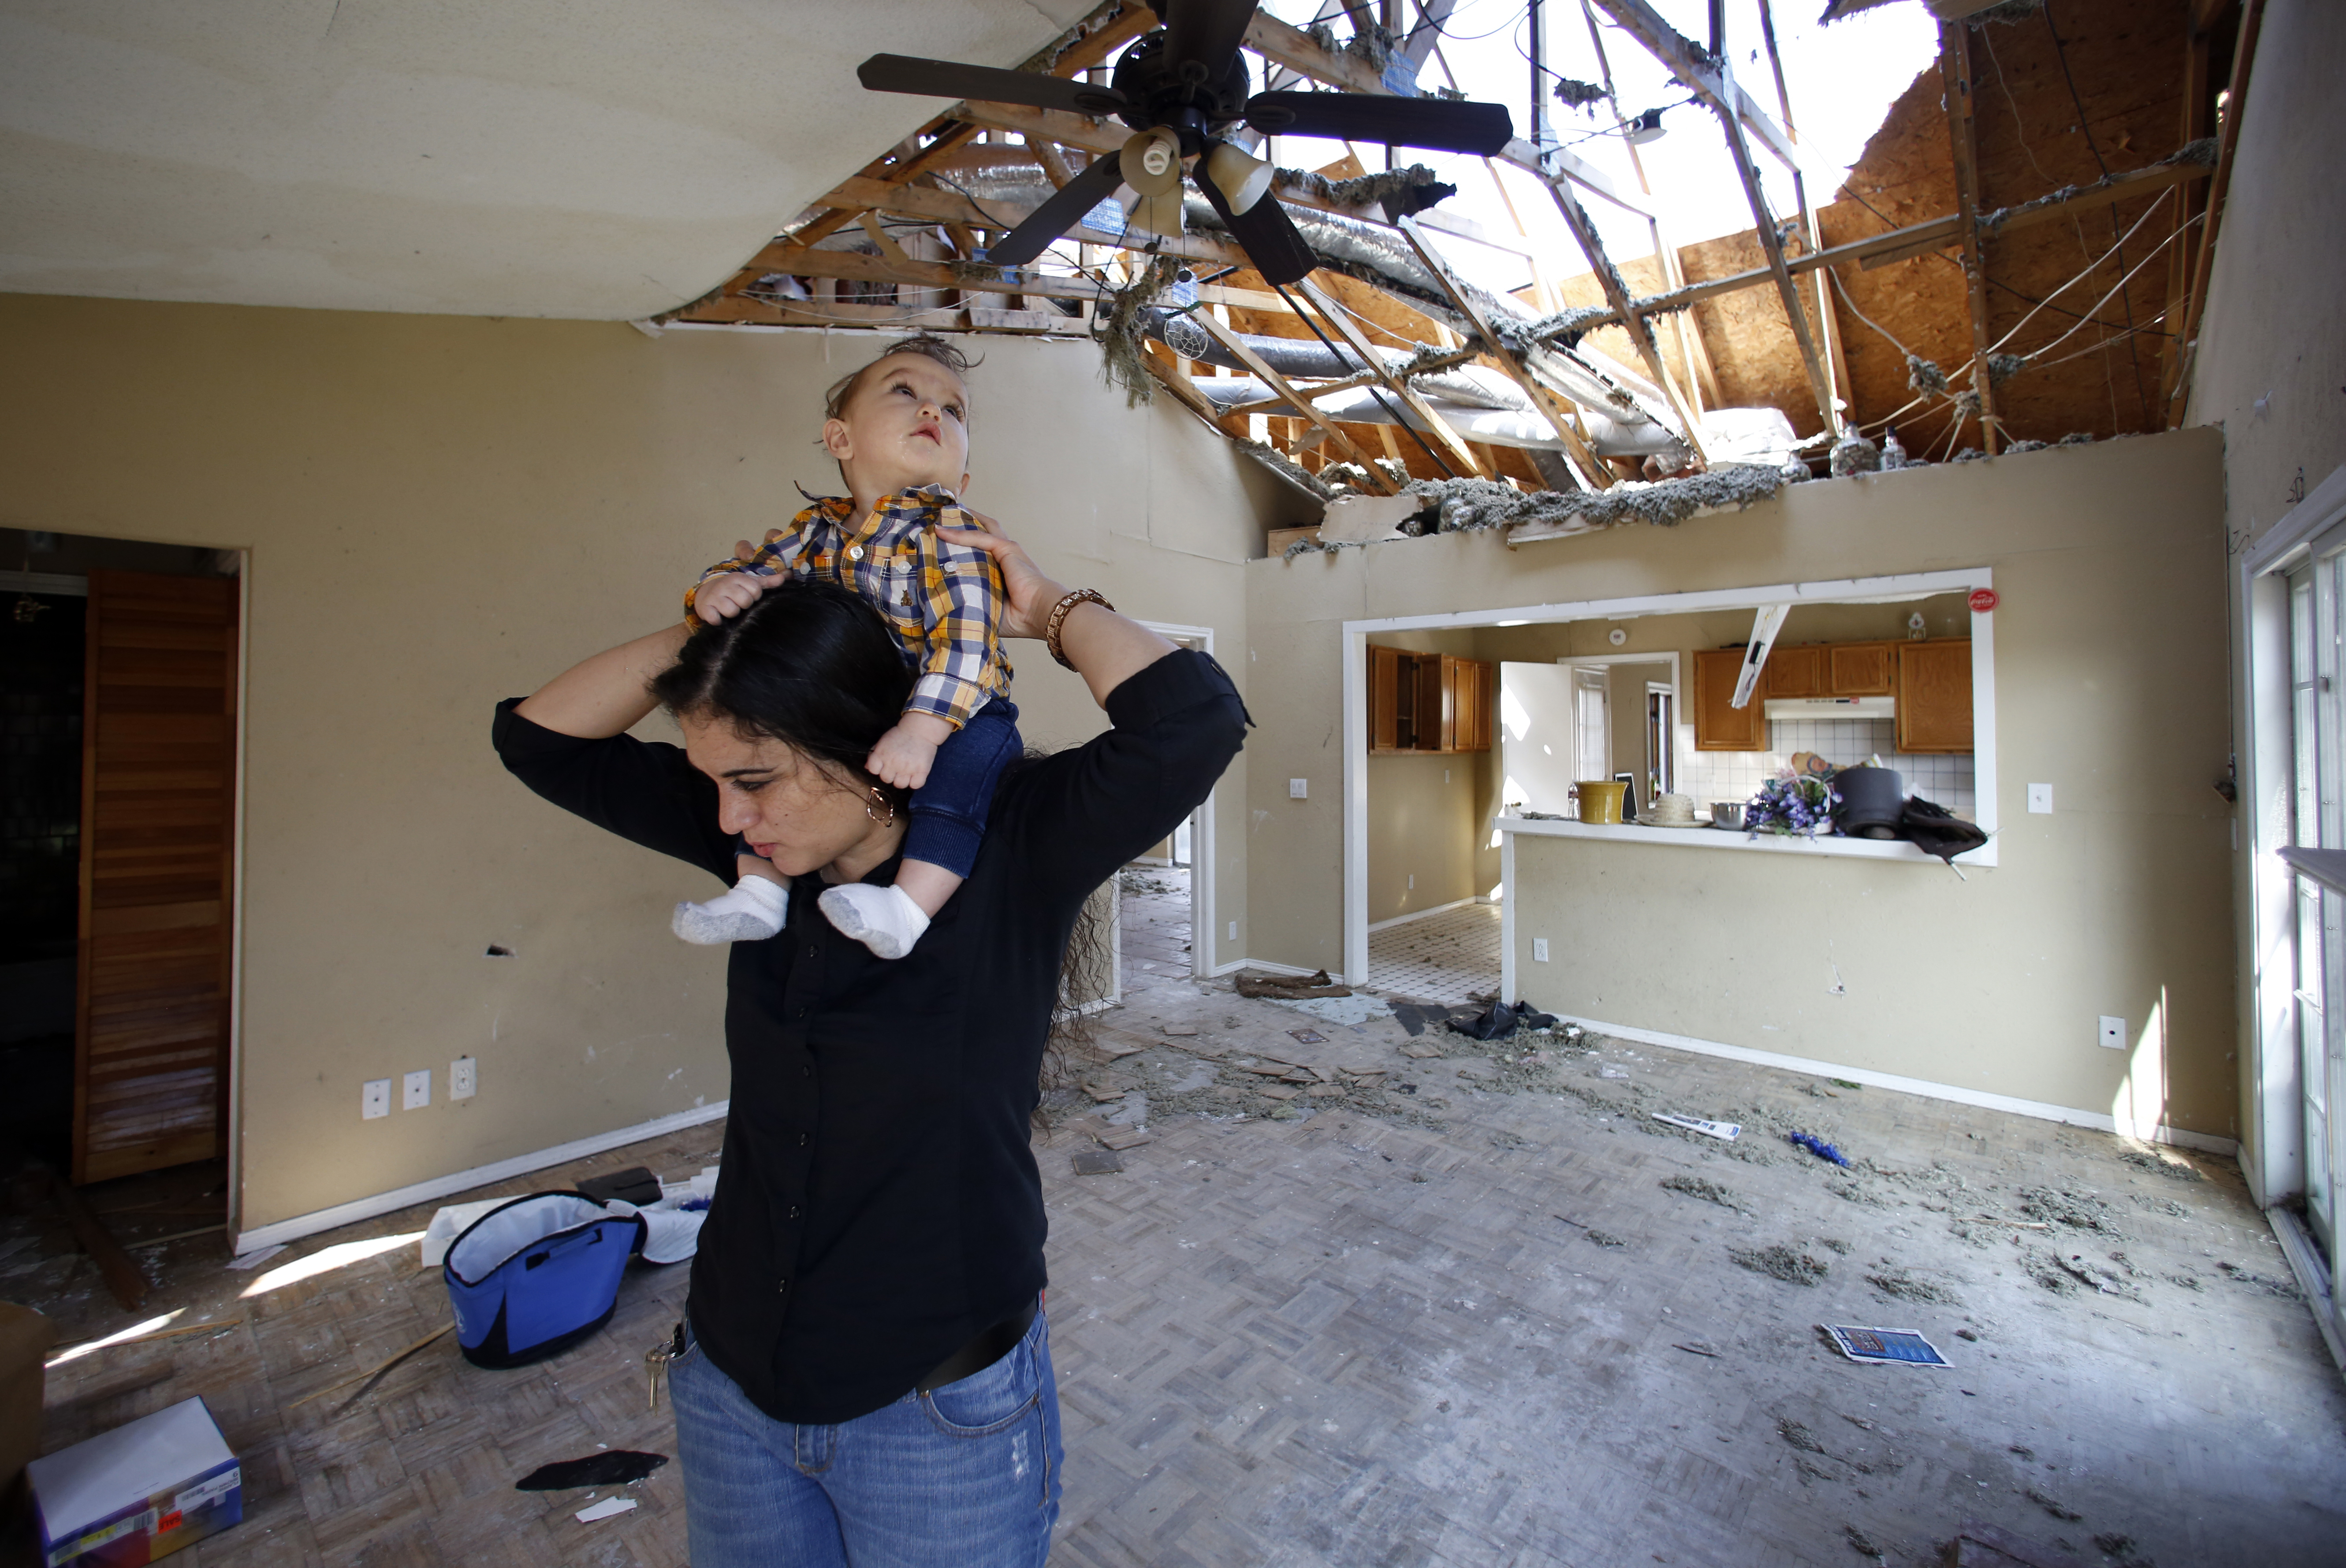 Lindsay Diaz and her son, 7-month-old Arian Krasniqui, in the living room of their Rowlett home. Photographed Friday, February 19, 2016. Photo/Lara Solt